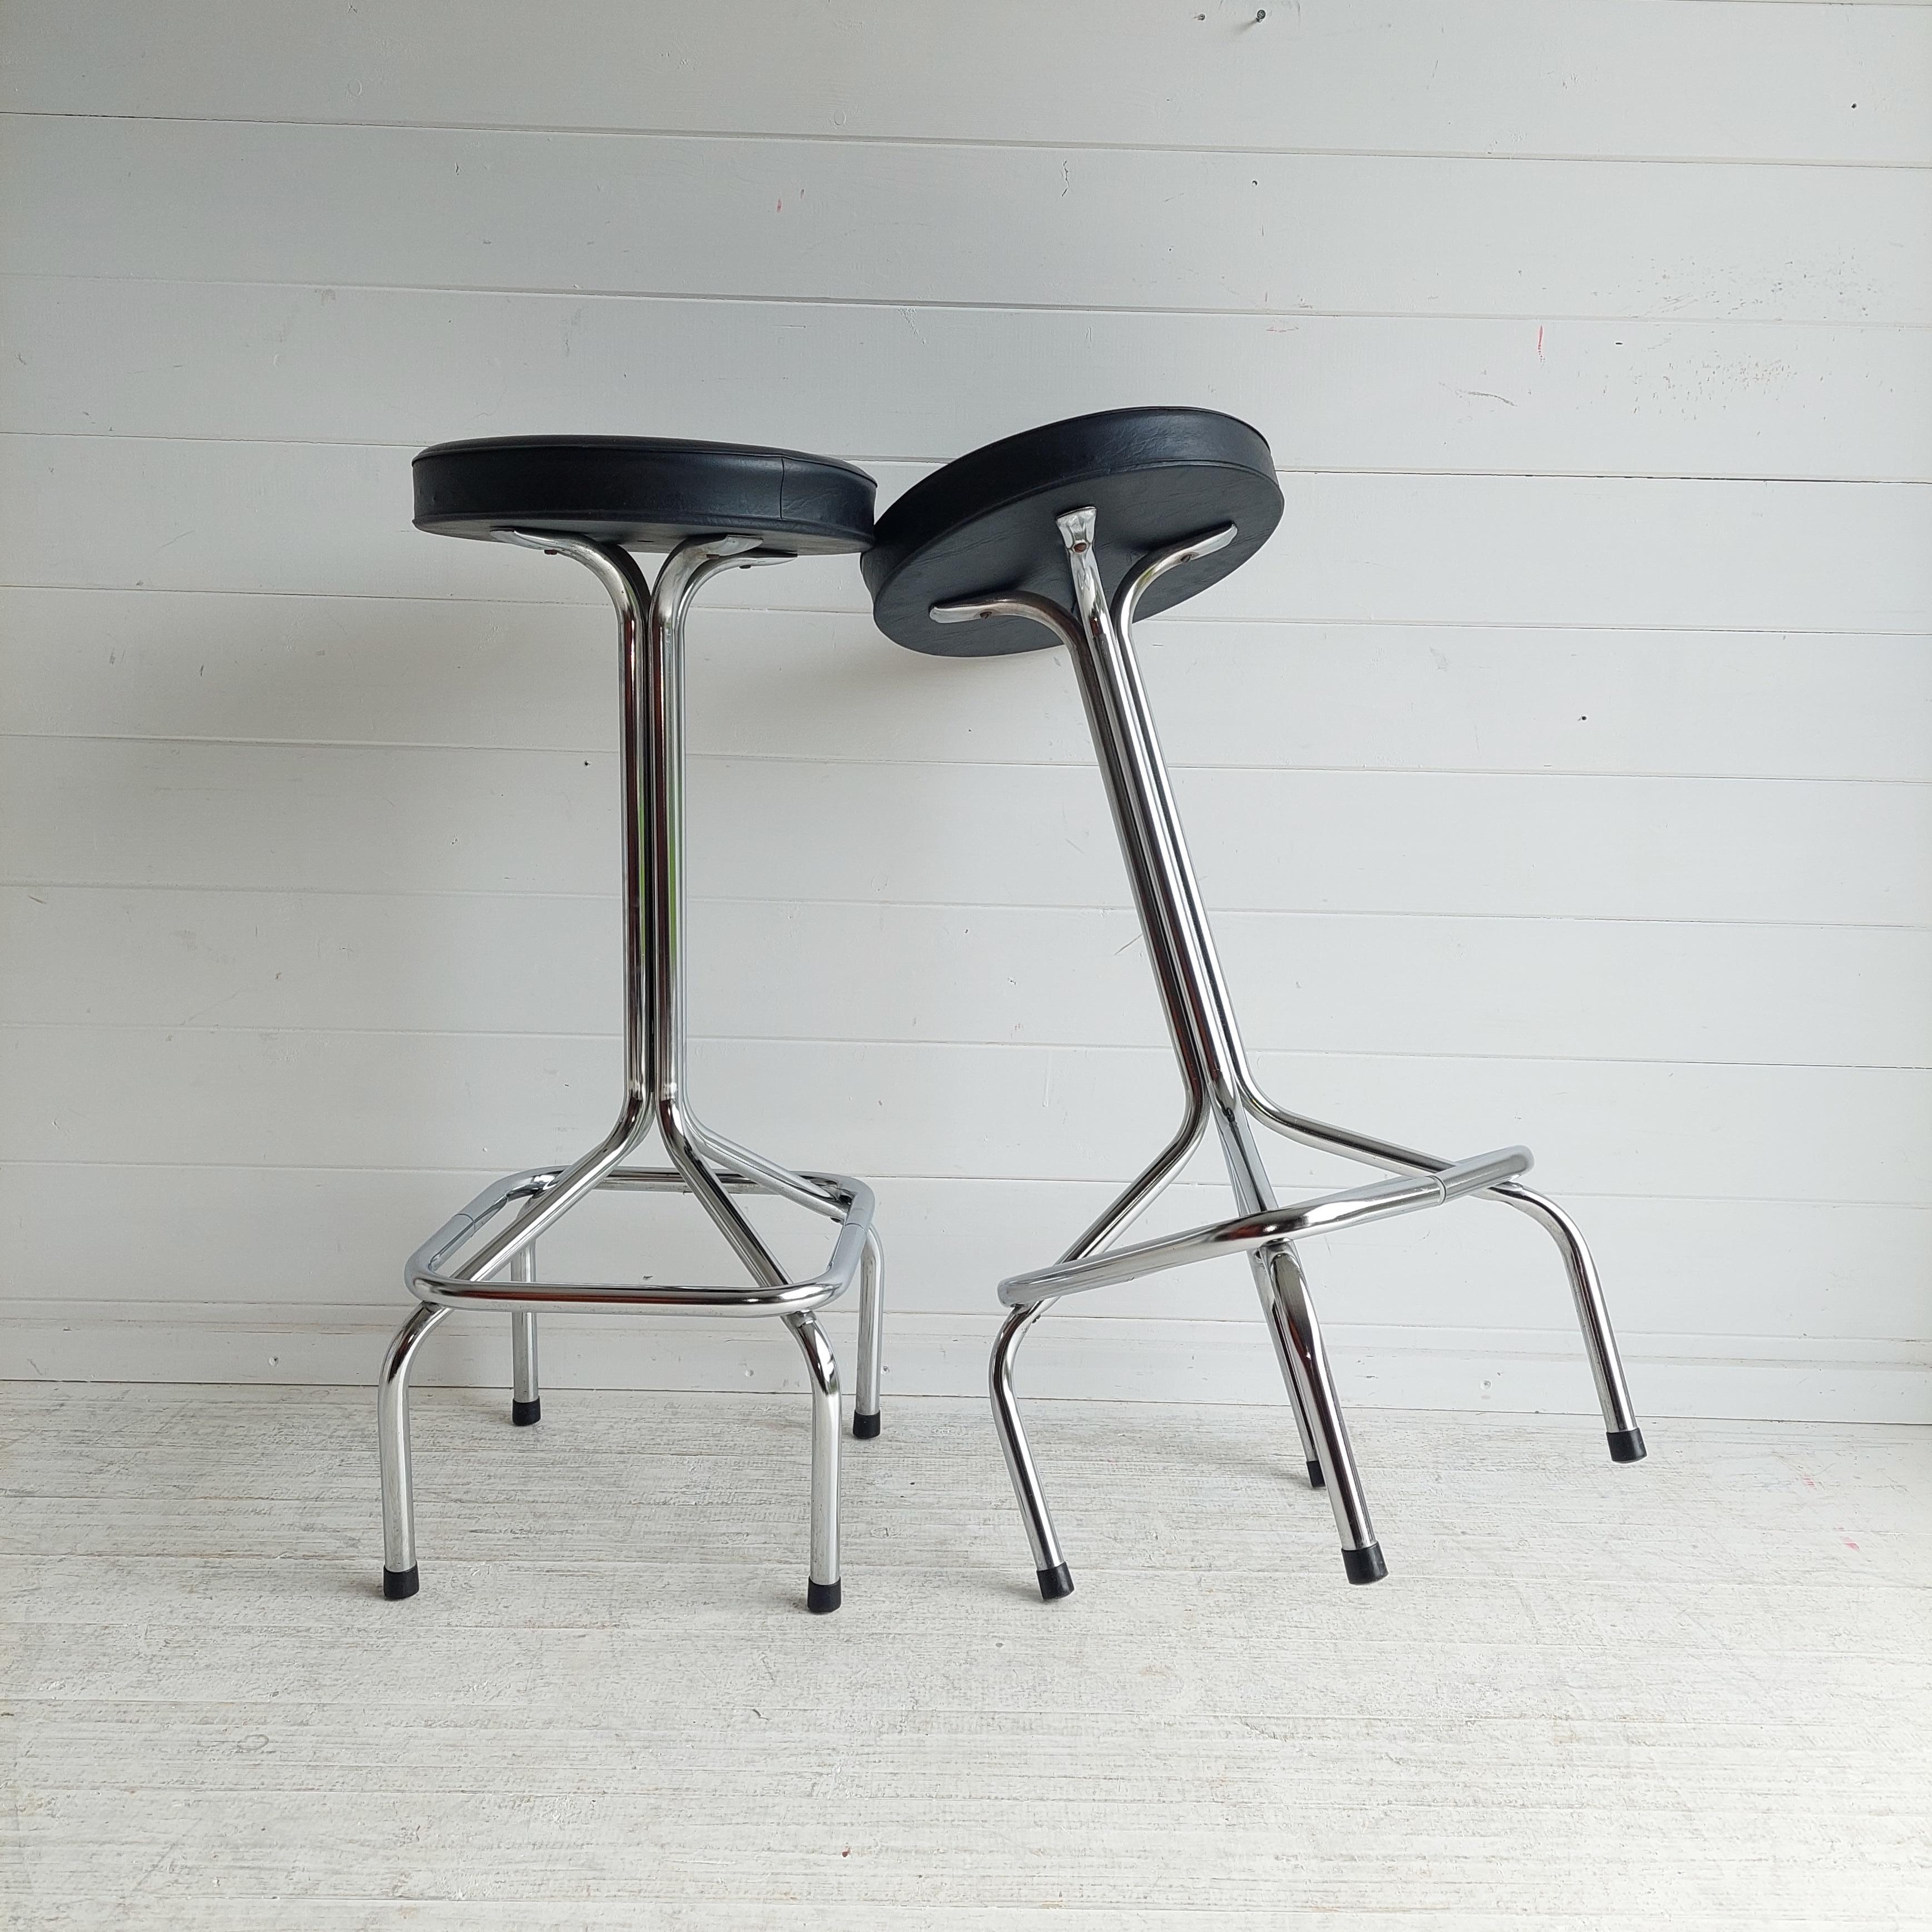 Pair of Vintage Mid century cantilever bar stools.
Made in Holland during the 50s/60s
Space age vibes bar stools

Tall Vintage Octopus-shaped Circular Chrome Industrial Bauhaus
A vintage stool whose versatility and utility made it a common sight in